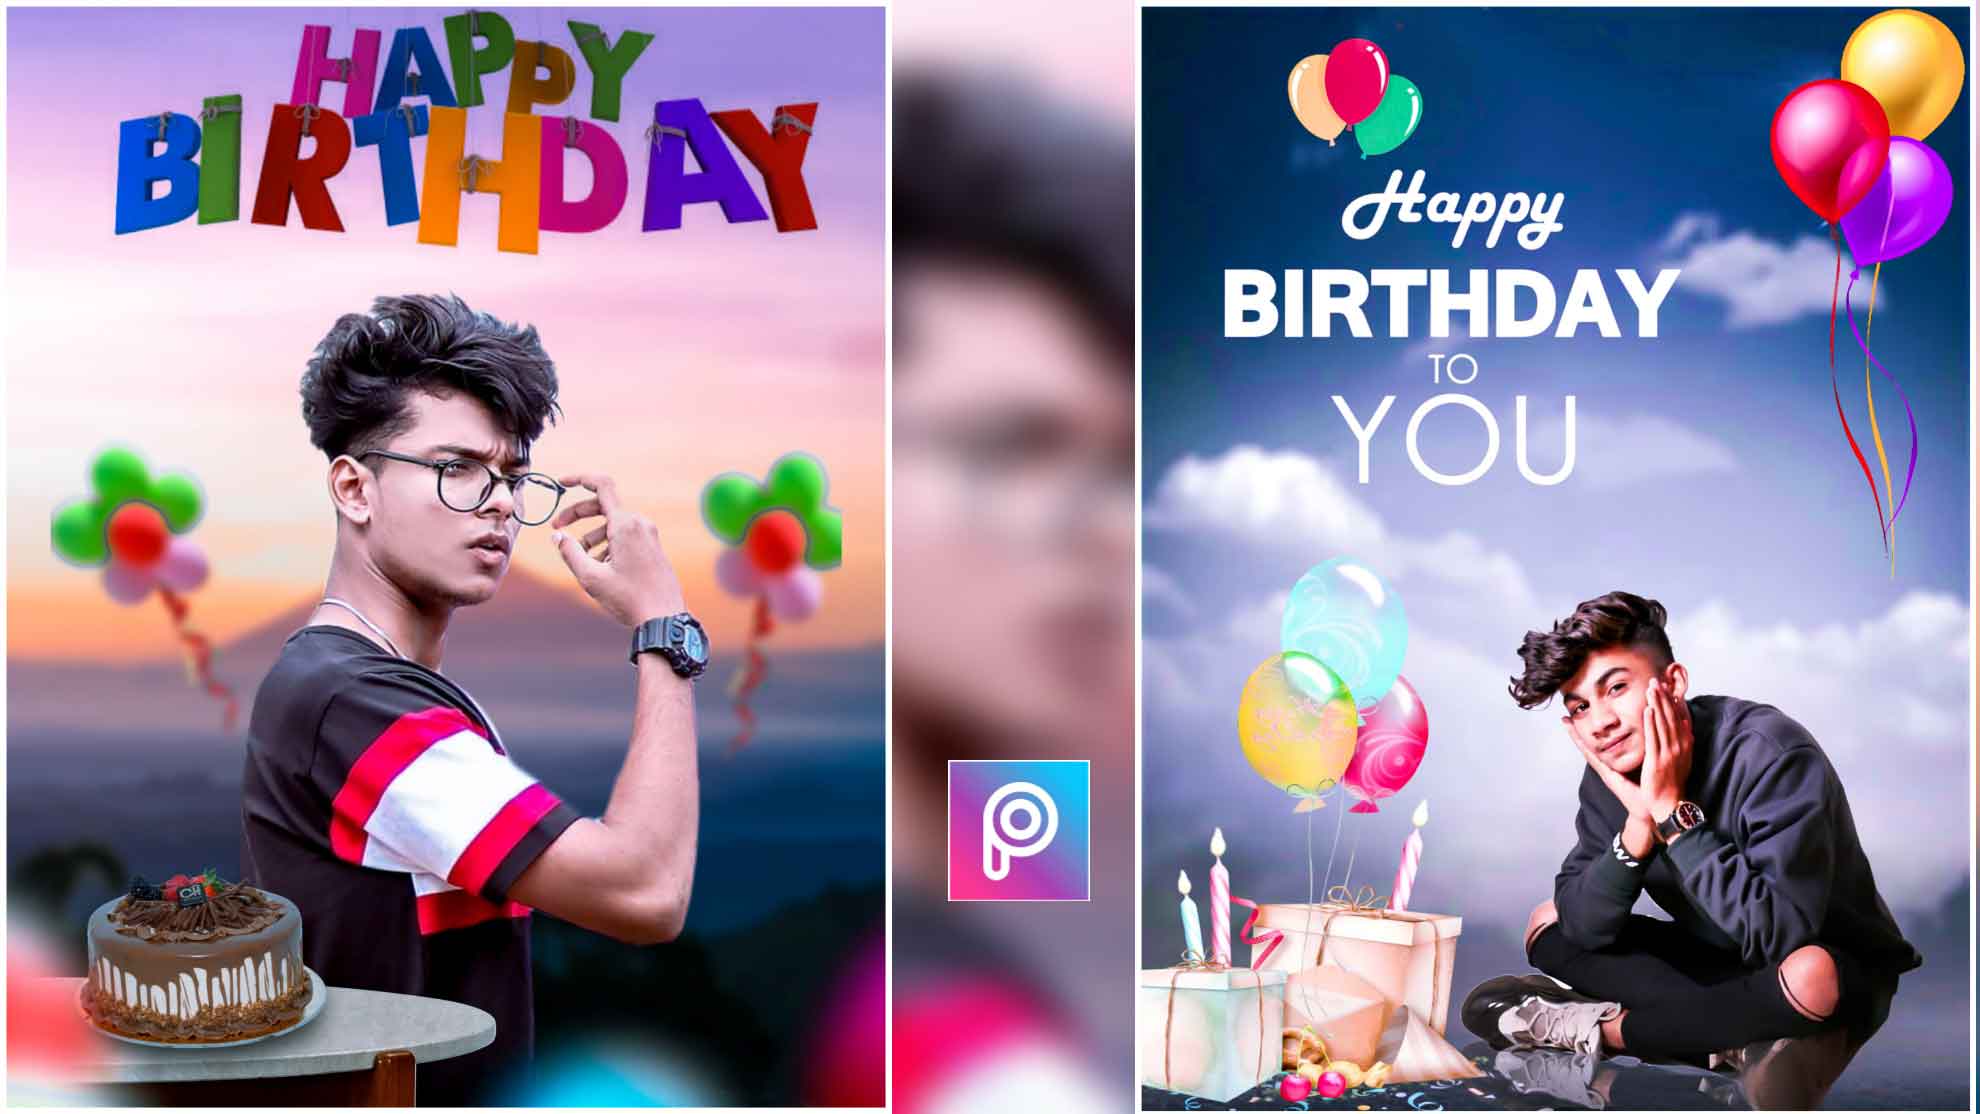 Happy birthday background for photo editing - create festive pictures